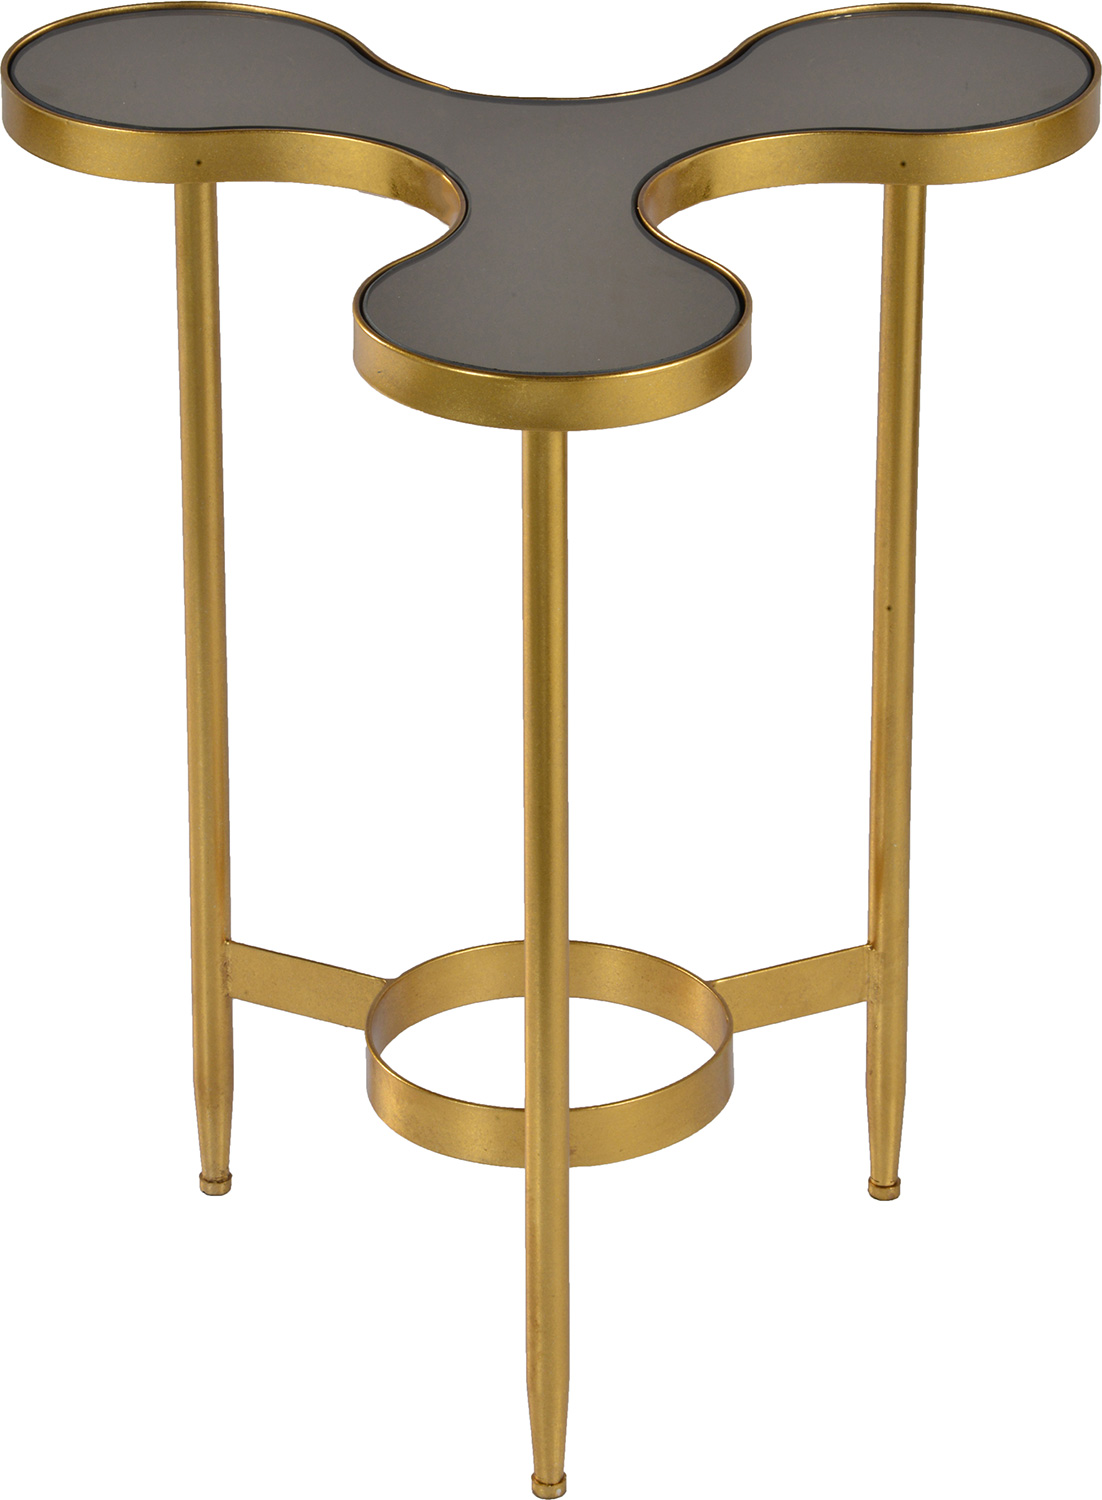 Ren-Wil Rute Side Table - Gold Leaf